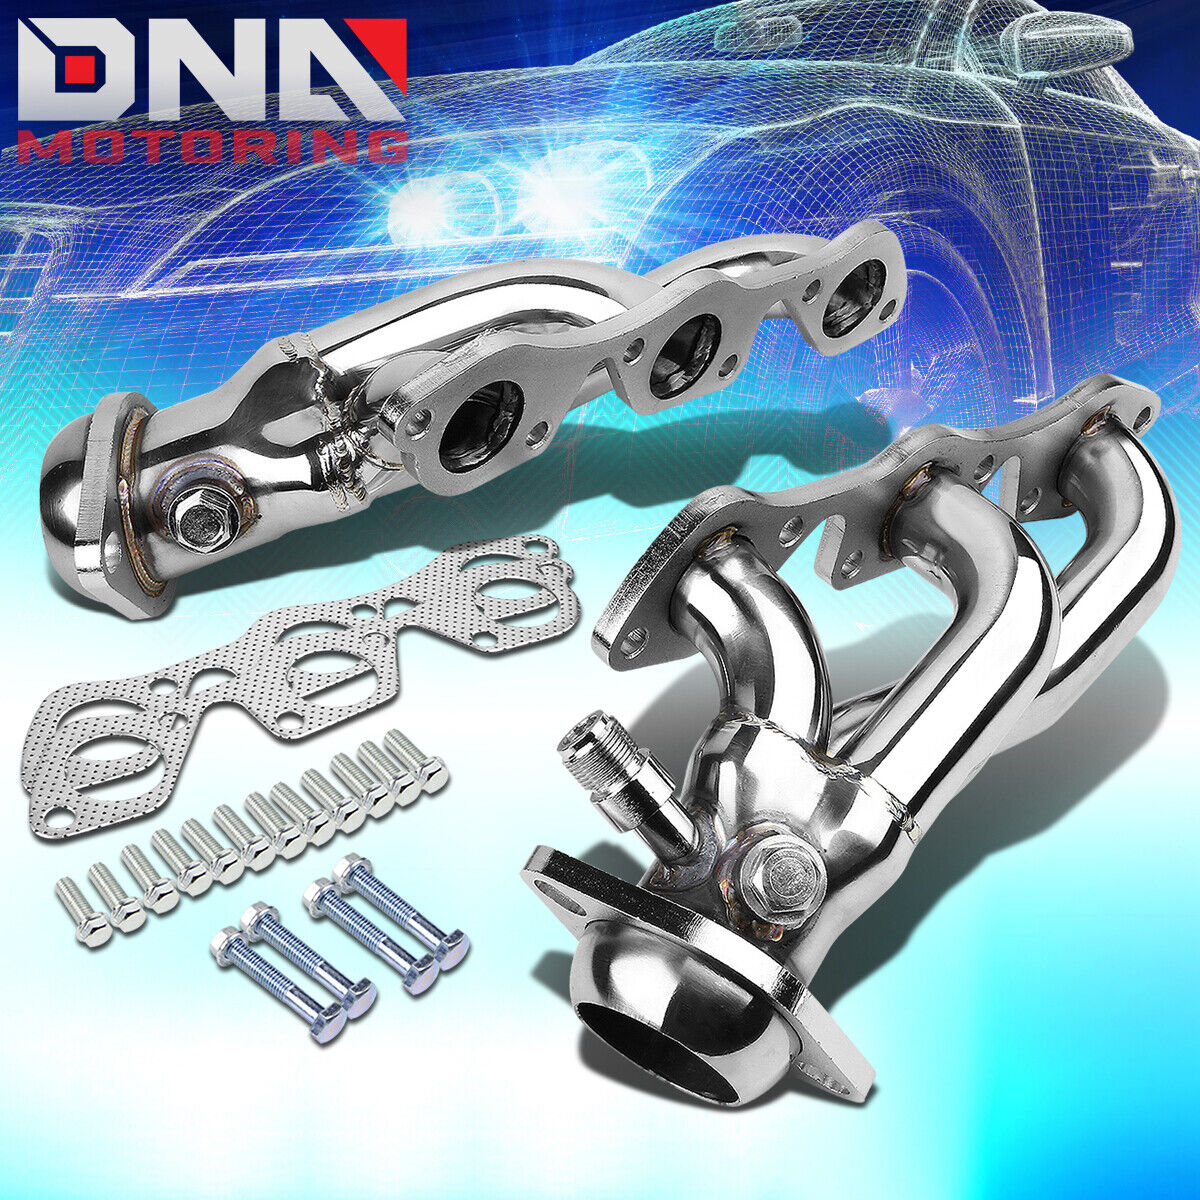 STAINLESS STEEL HEADER FOR 97-03 F150/HERITAGE 4.2L V6 PICKUP EXHAUST/MANIFOLD